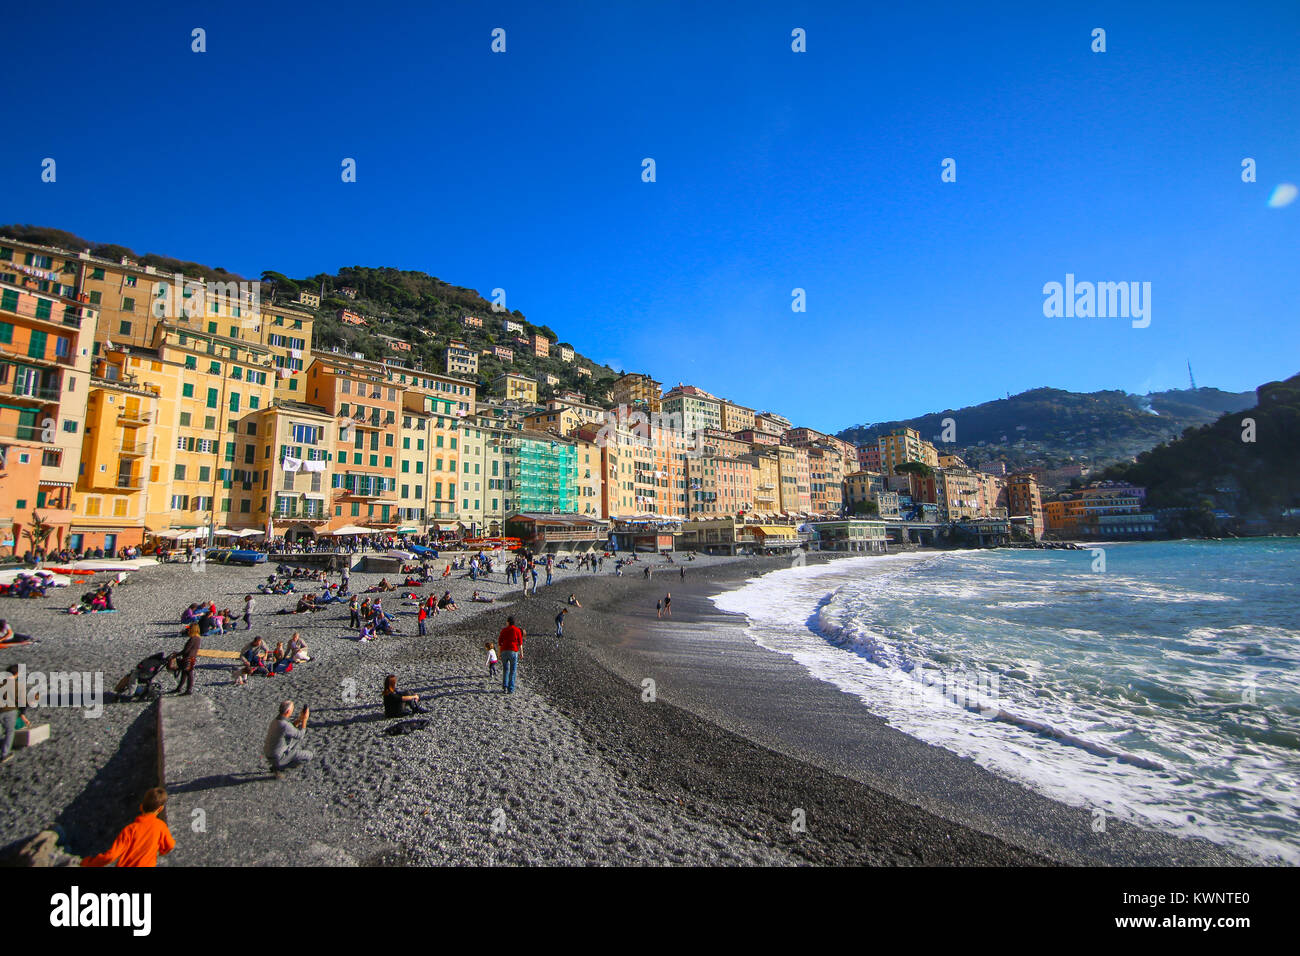 Camogli, Italy - People relaxing on the beach at the Mediterranean Sea Stock Photo